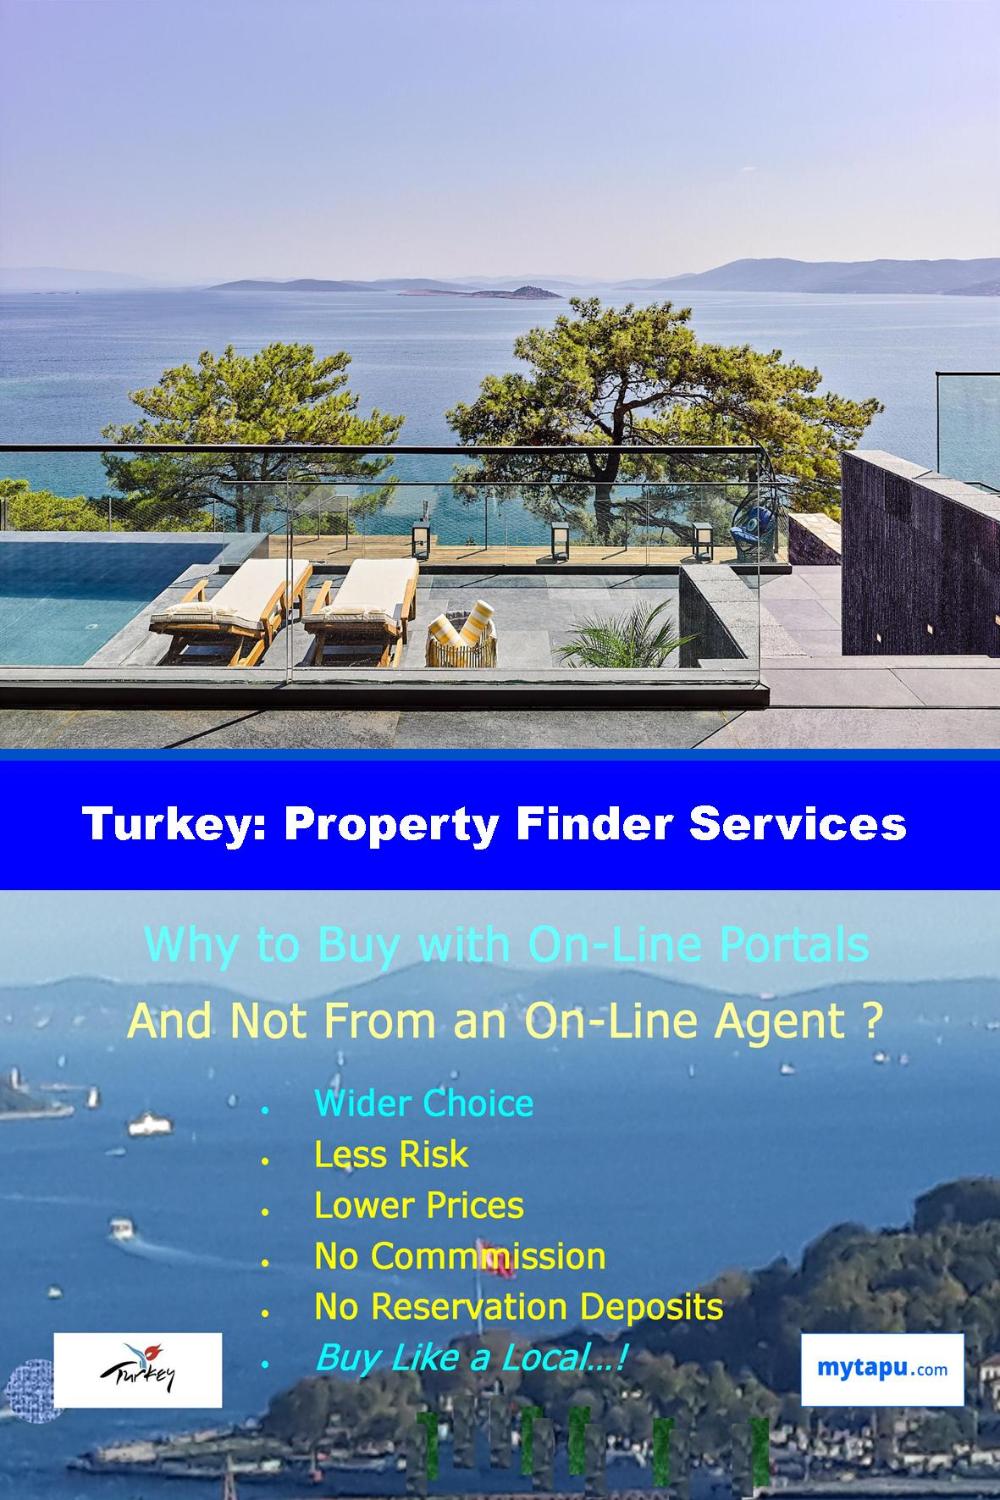 Exclusive Luxury Property for Investment in Prime Turkish Coastal Locations